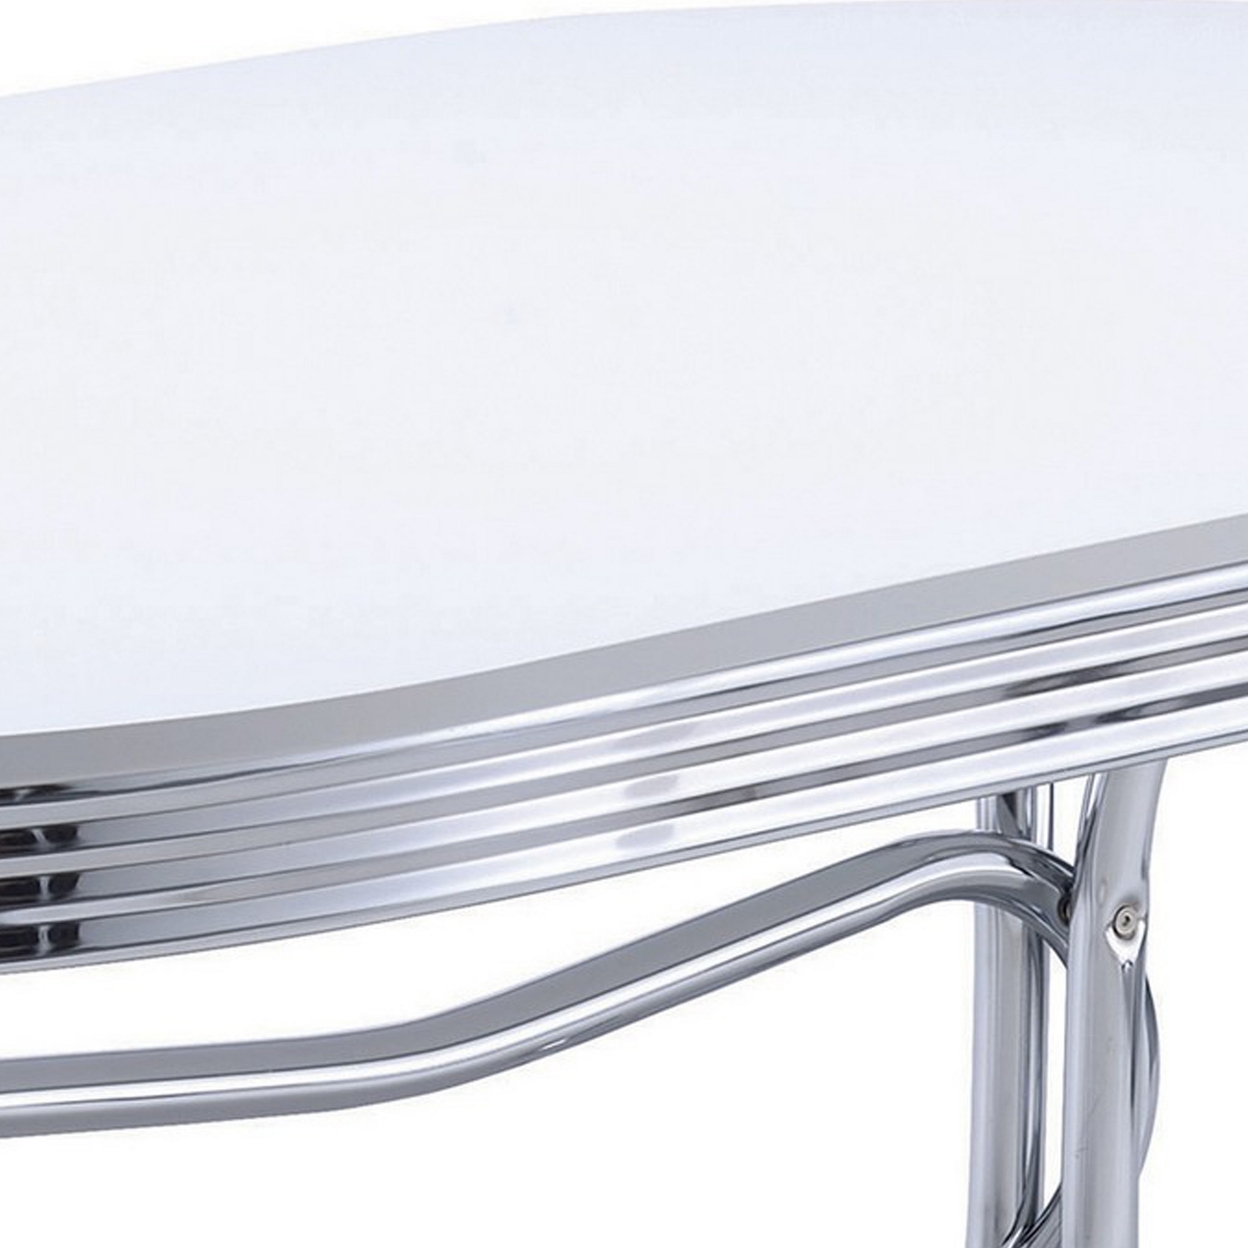 Loy 60 Inch Oval Dining Table, Glossy White Wood Top, Ribbed Chrome Apron- Saltoro Sherpi